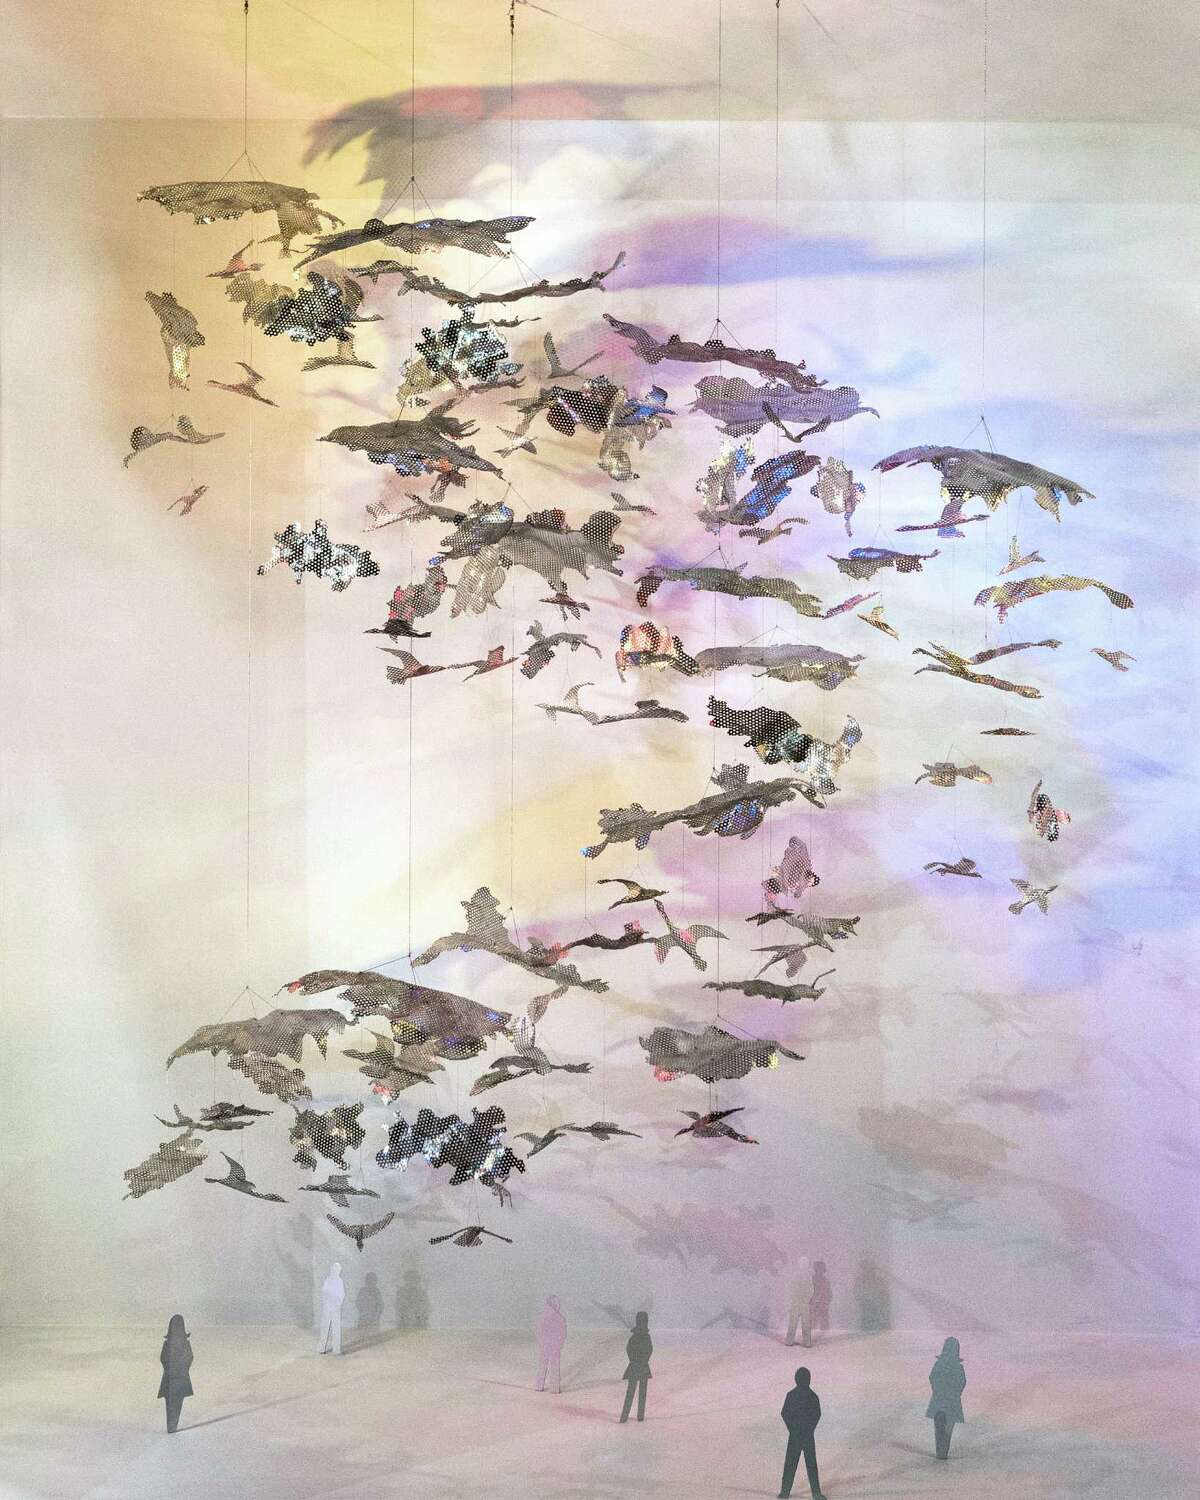 As shown in this model, sculptor Ed Wilson's proposal for the interior George R. Brown Convention Center commission depicts a 60-foot mobile of bird and cloud forms made of perforated stainless steel. The artist envisions colorful, changing lights to help bring the piece to life. Due in March 2016, it will hang in the new lobby of the George R. Brown Convention Center. Houston Arts Alliance - Model of George R. Brown commisioned art installation by Houston artist Ed Wilson.